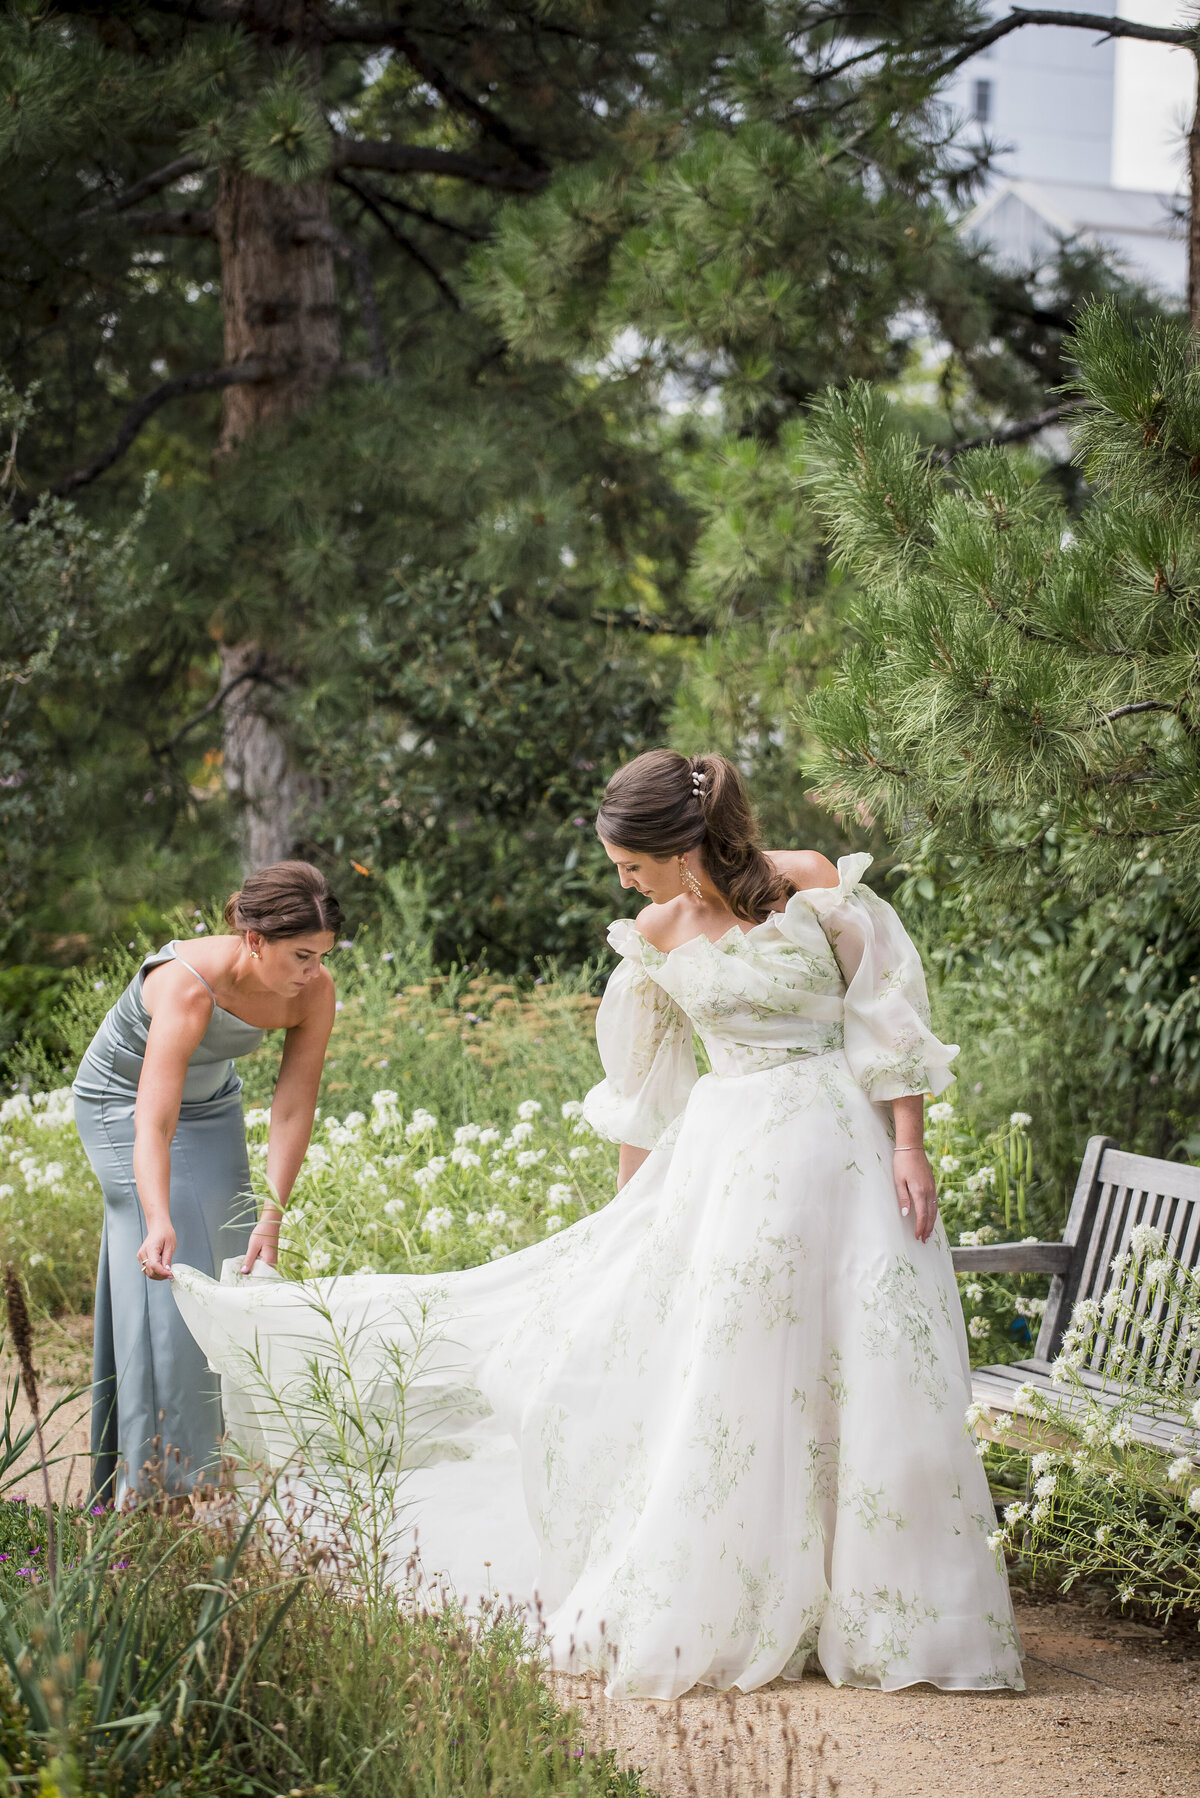 A bridesmaid adjusts the bride's dress train as she gets ready for her first look on her wedding day.